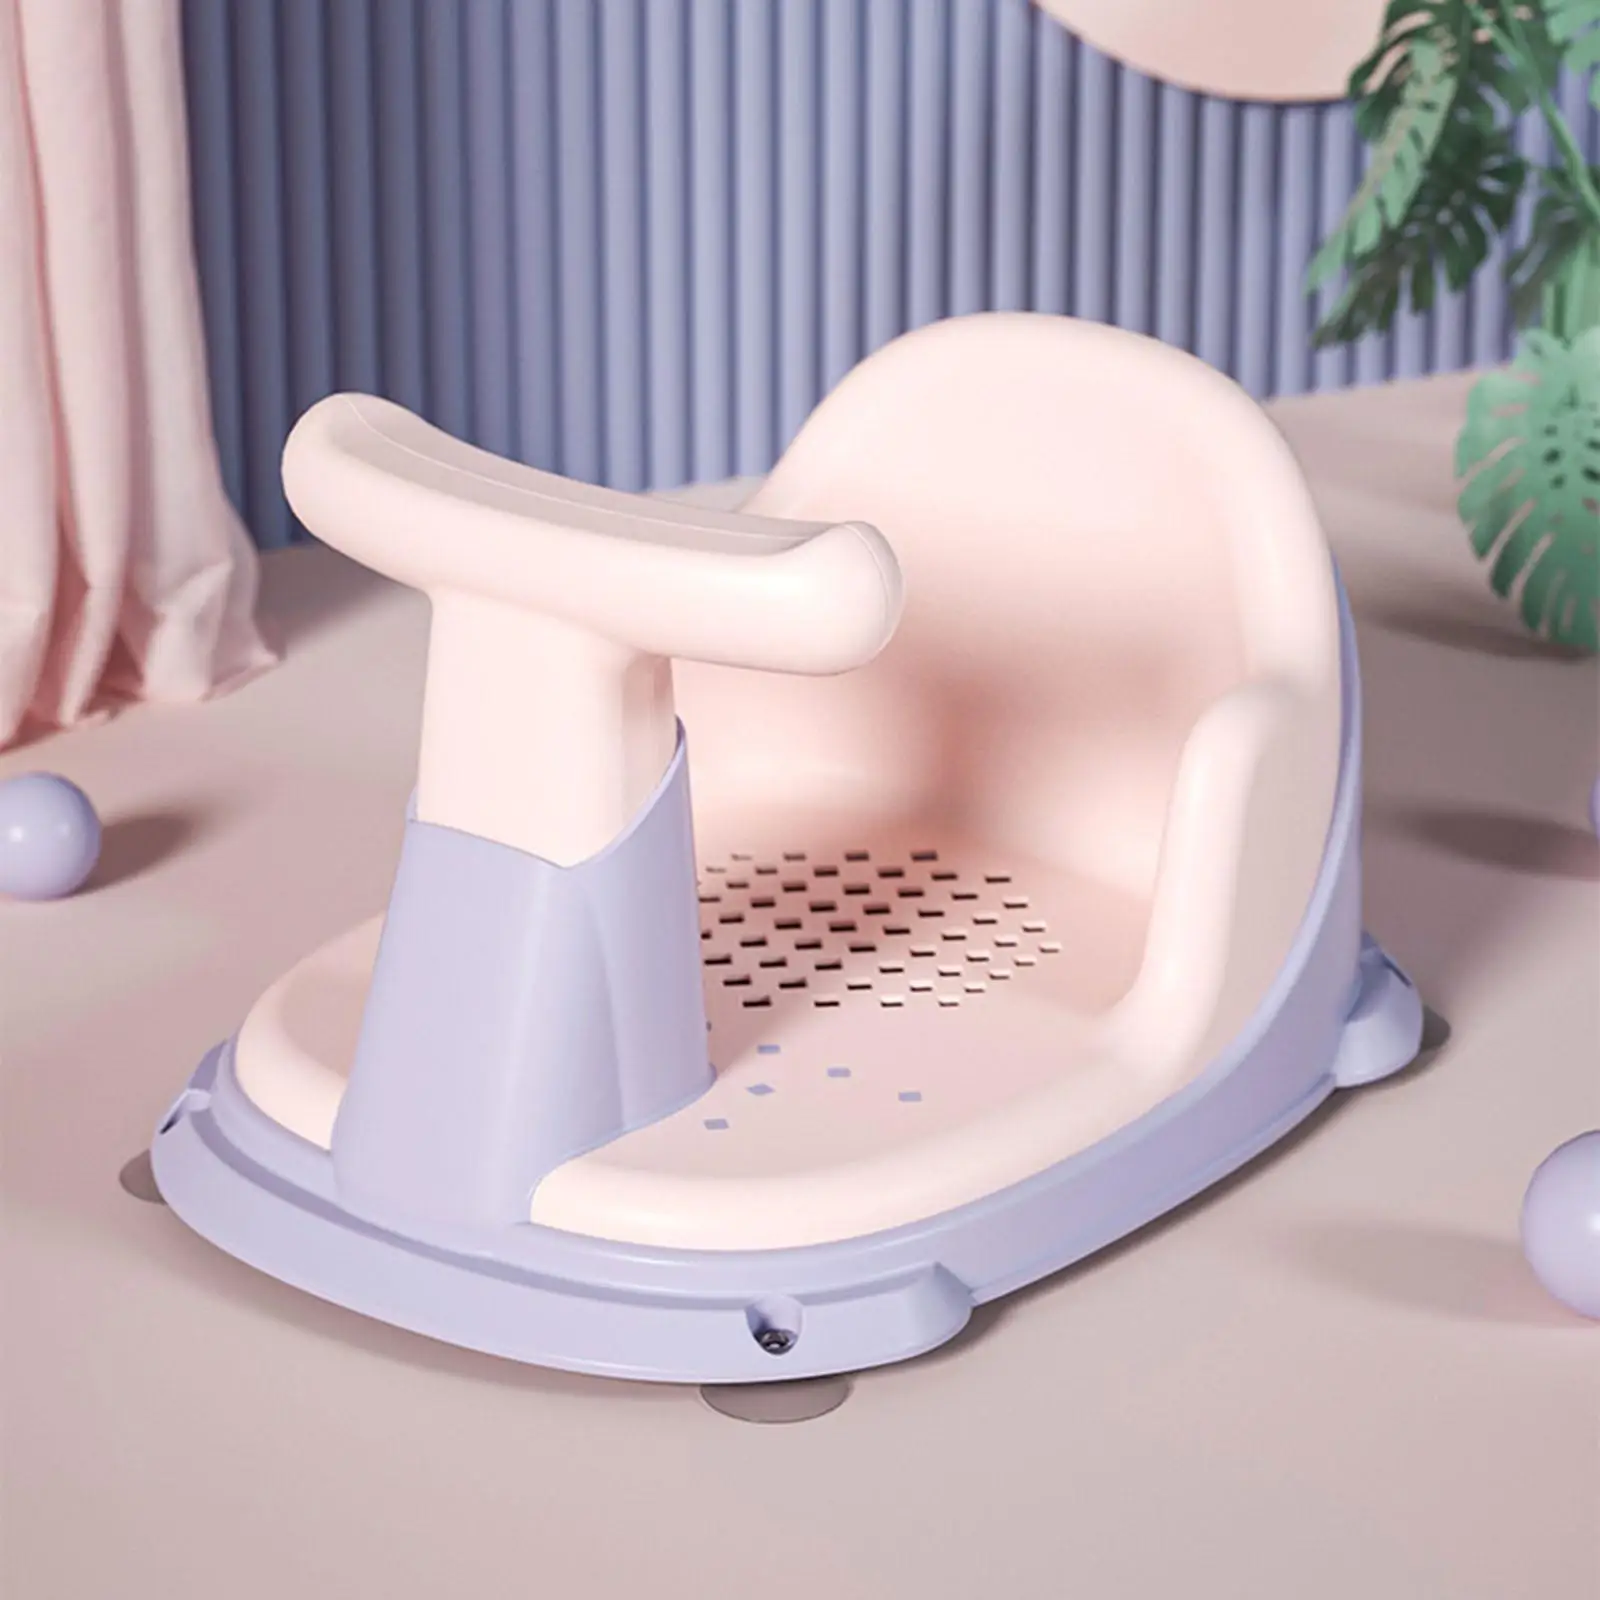 Shower Bath Seat Sit up Bathing Chair with Suction Cup Support Non Slip for Baby Shower Girls Boys Bathroom Toddler